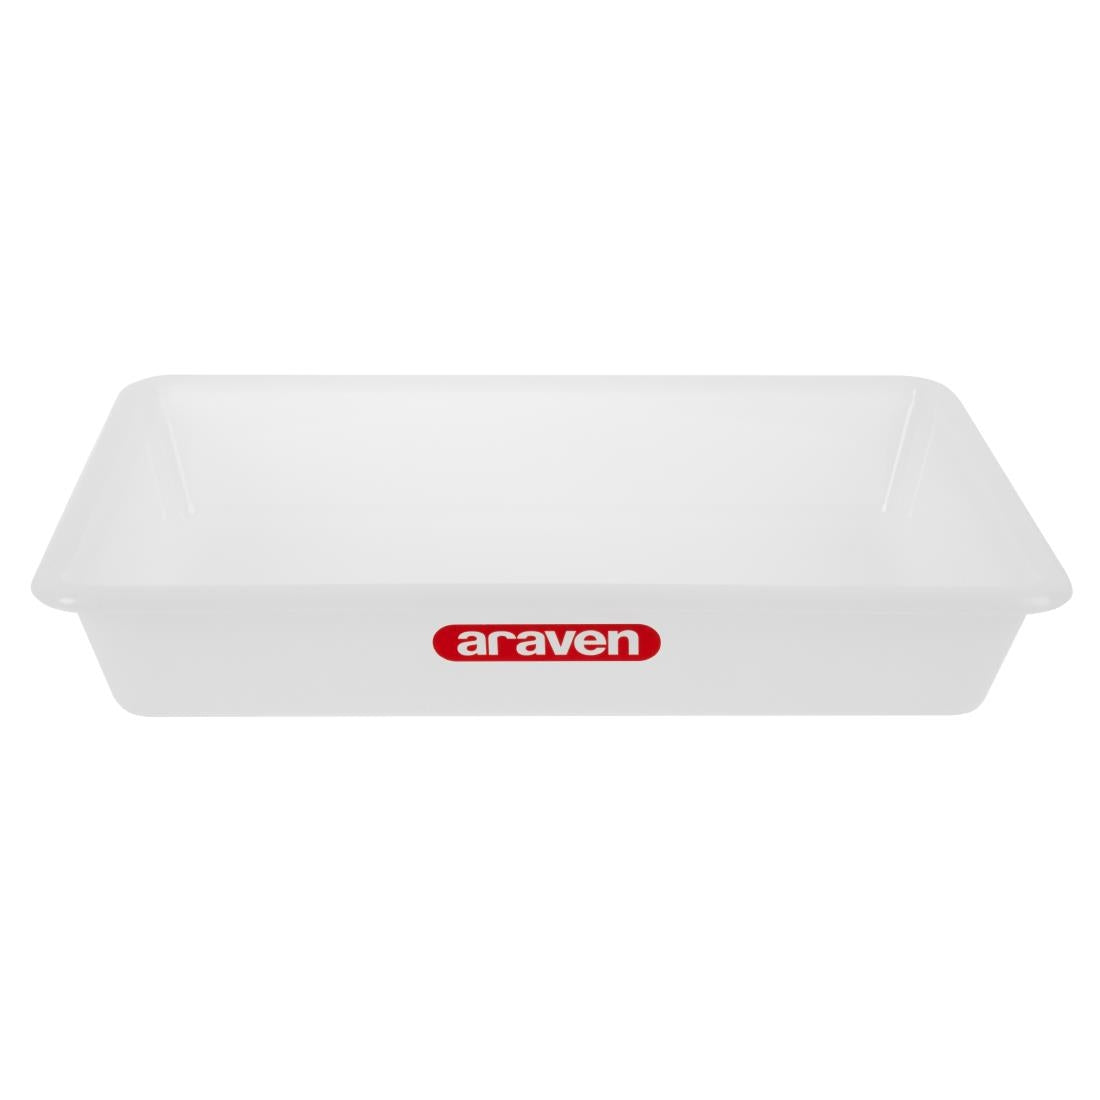 Araven Food Storage Tray 17in JD Catering Equipment Solutions Ltd